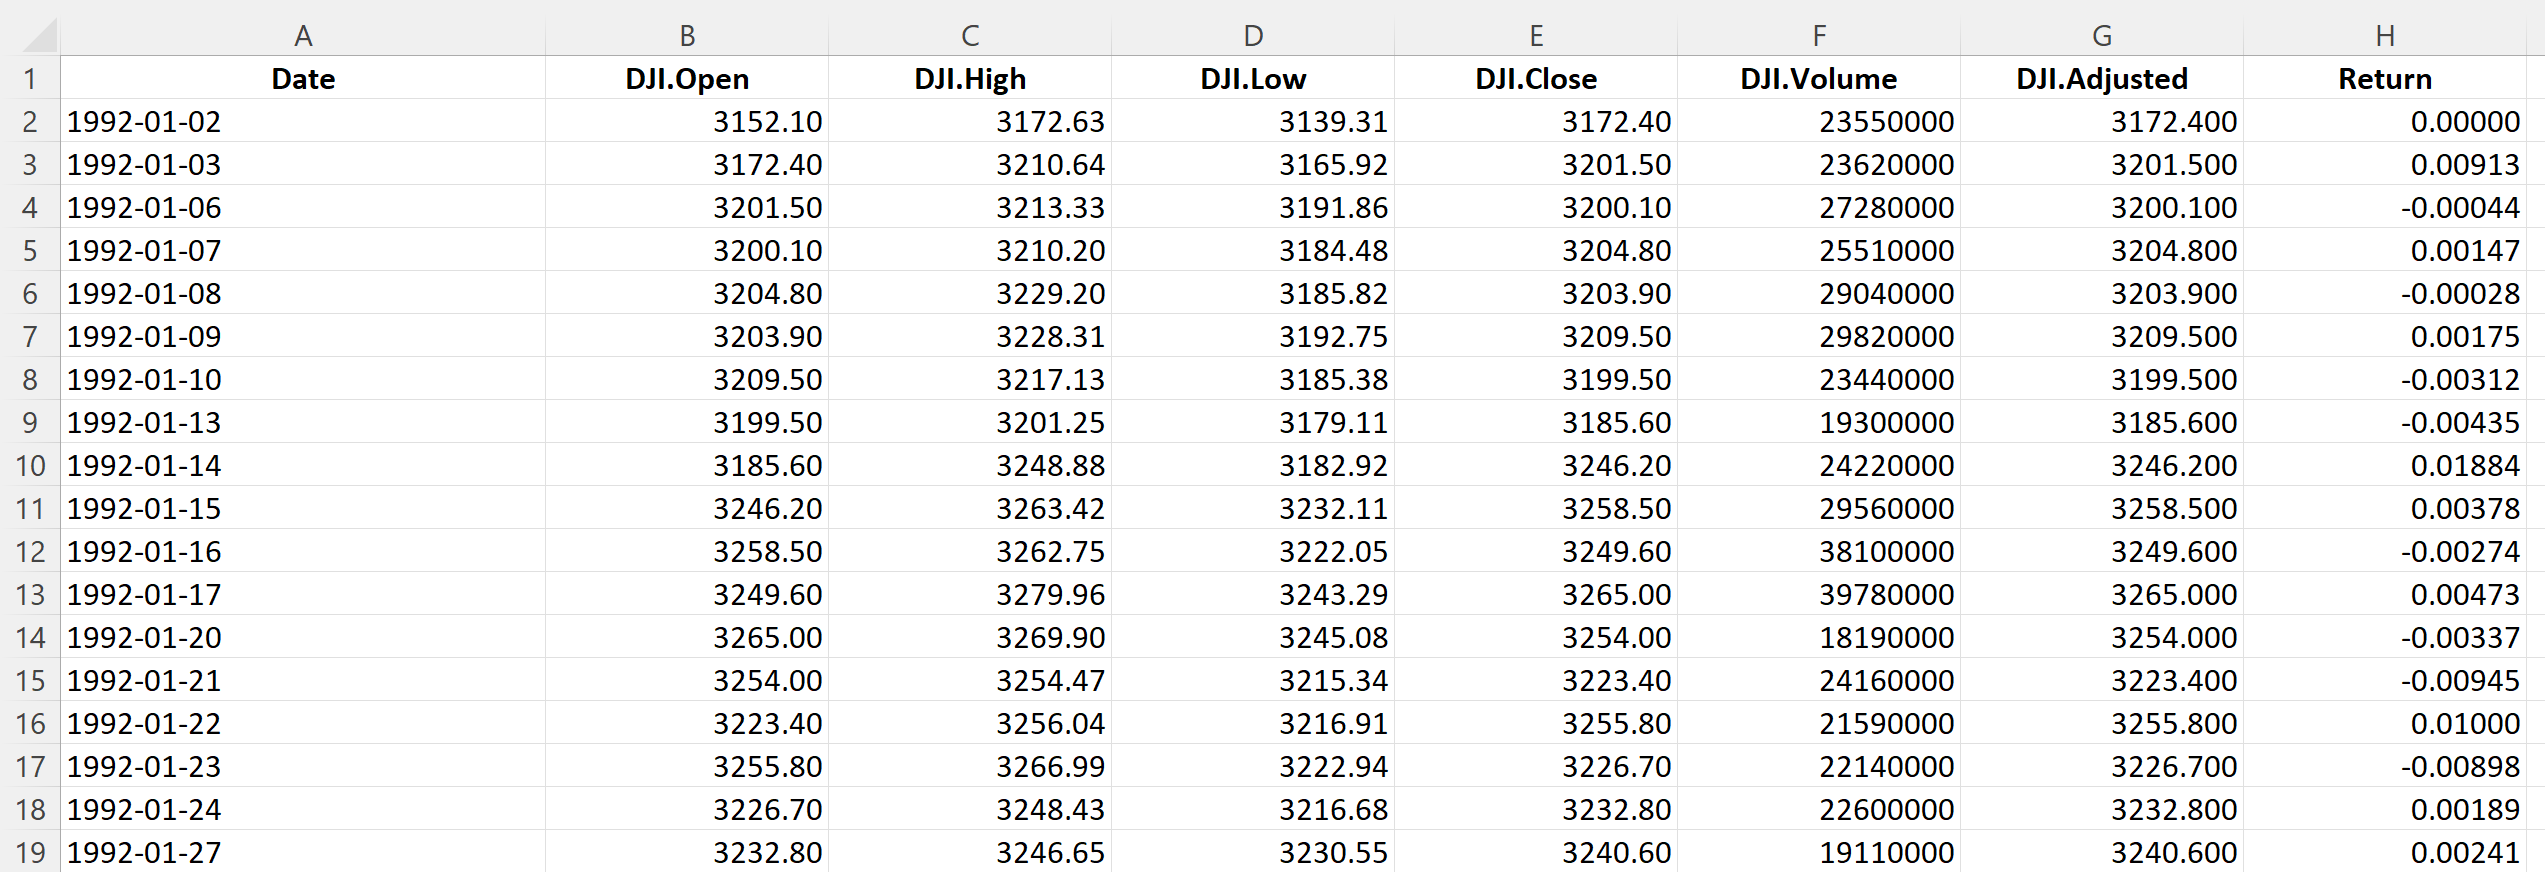 Top of the file for the DJIA index data